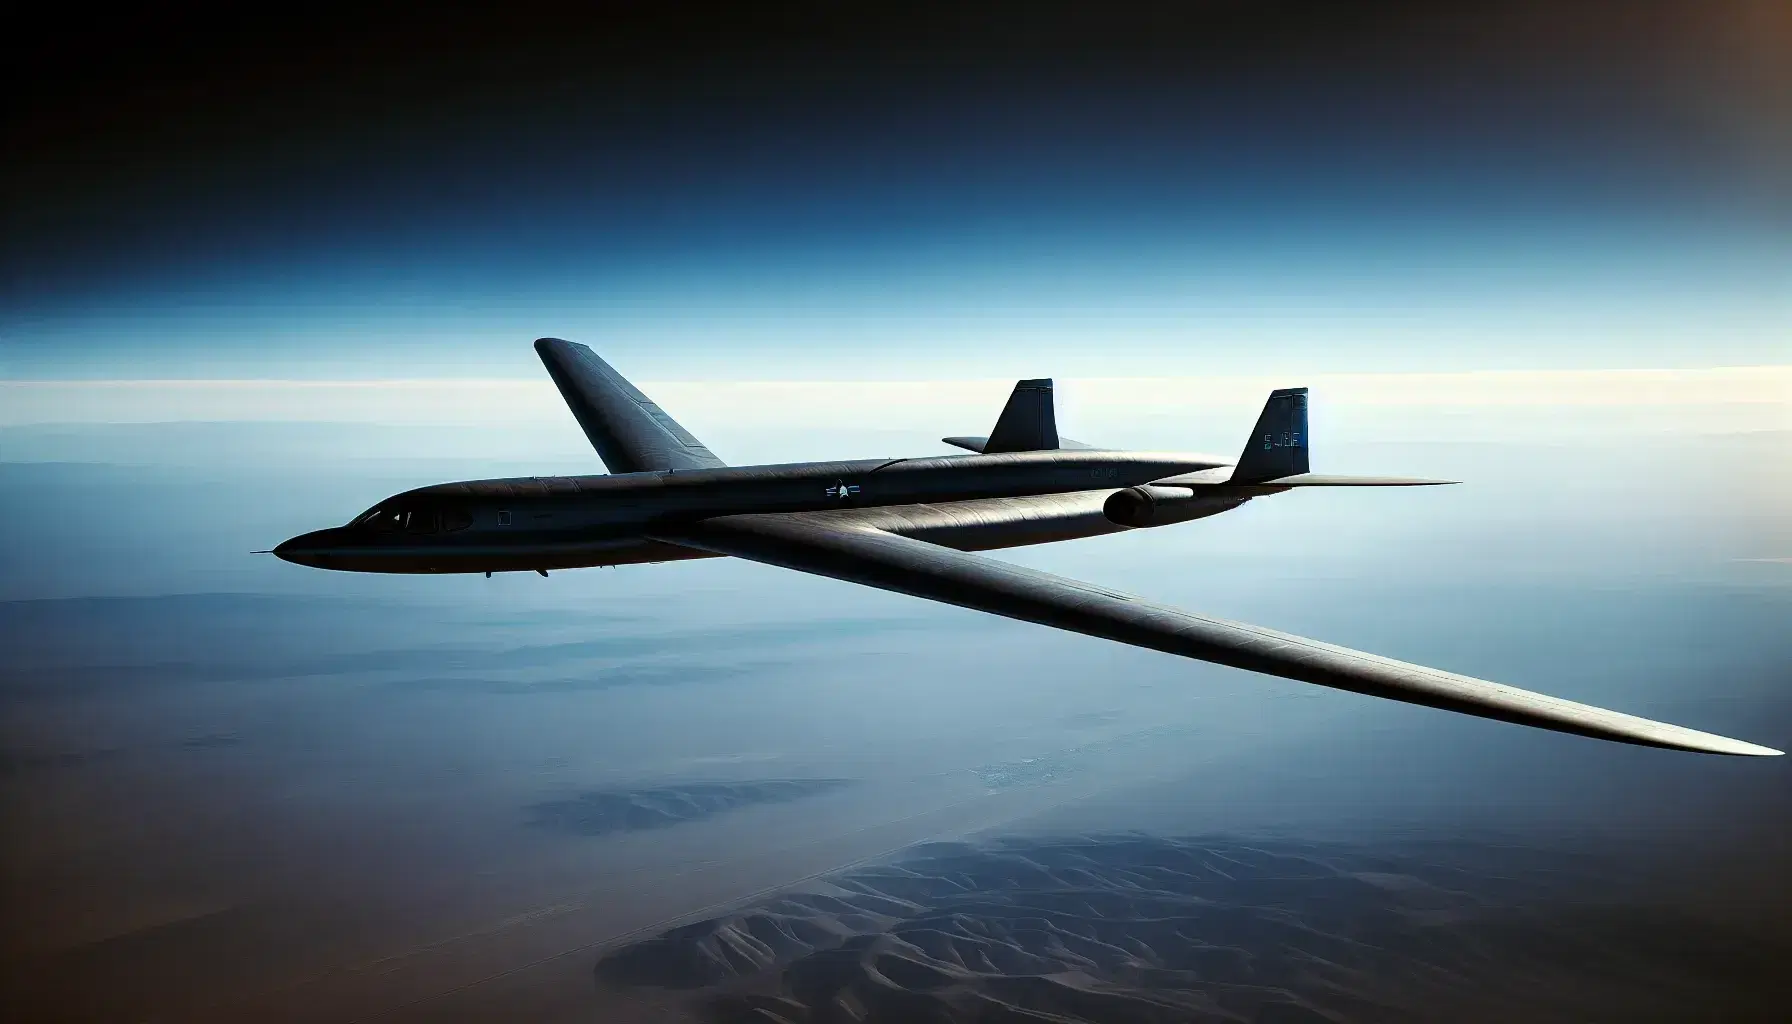 U-2 reconnaissance aircraft soaring at high altitude with long wings against a clear blue sky over a barren landscape.